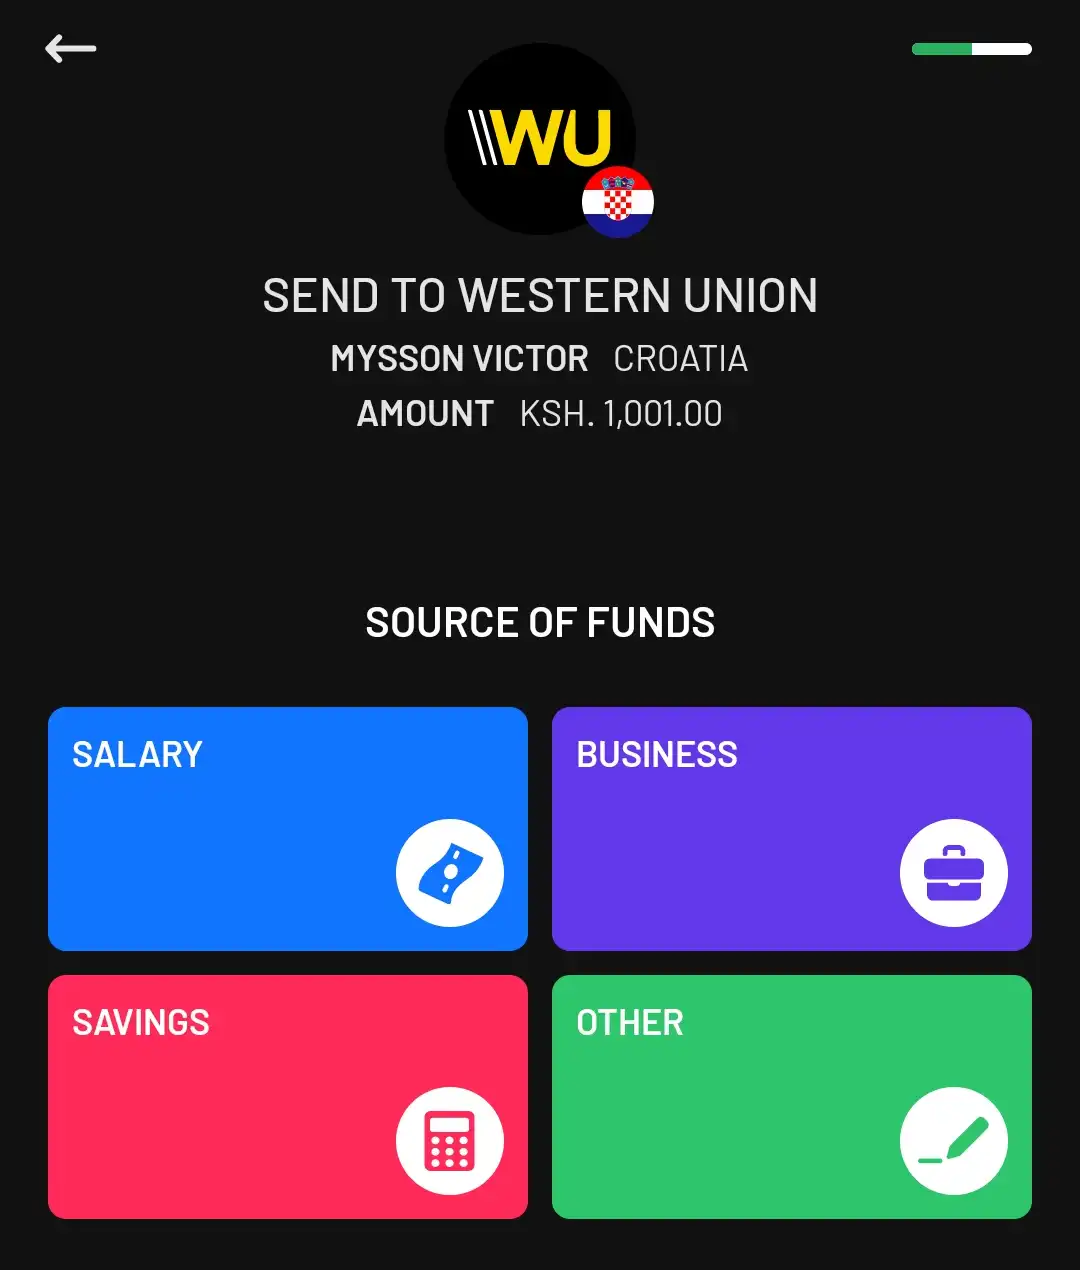 M-pesa Global Send to Western Union source of funds